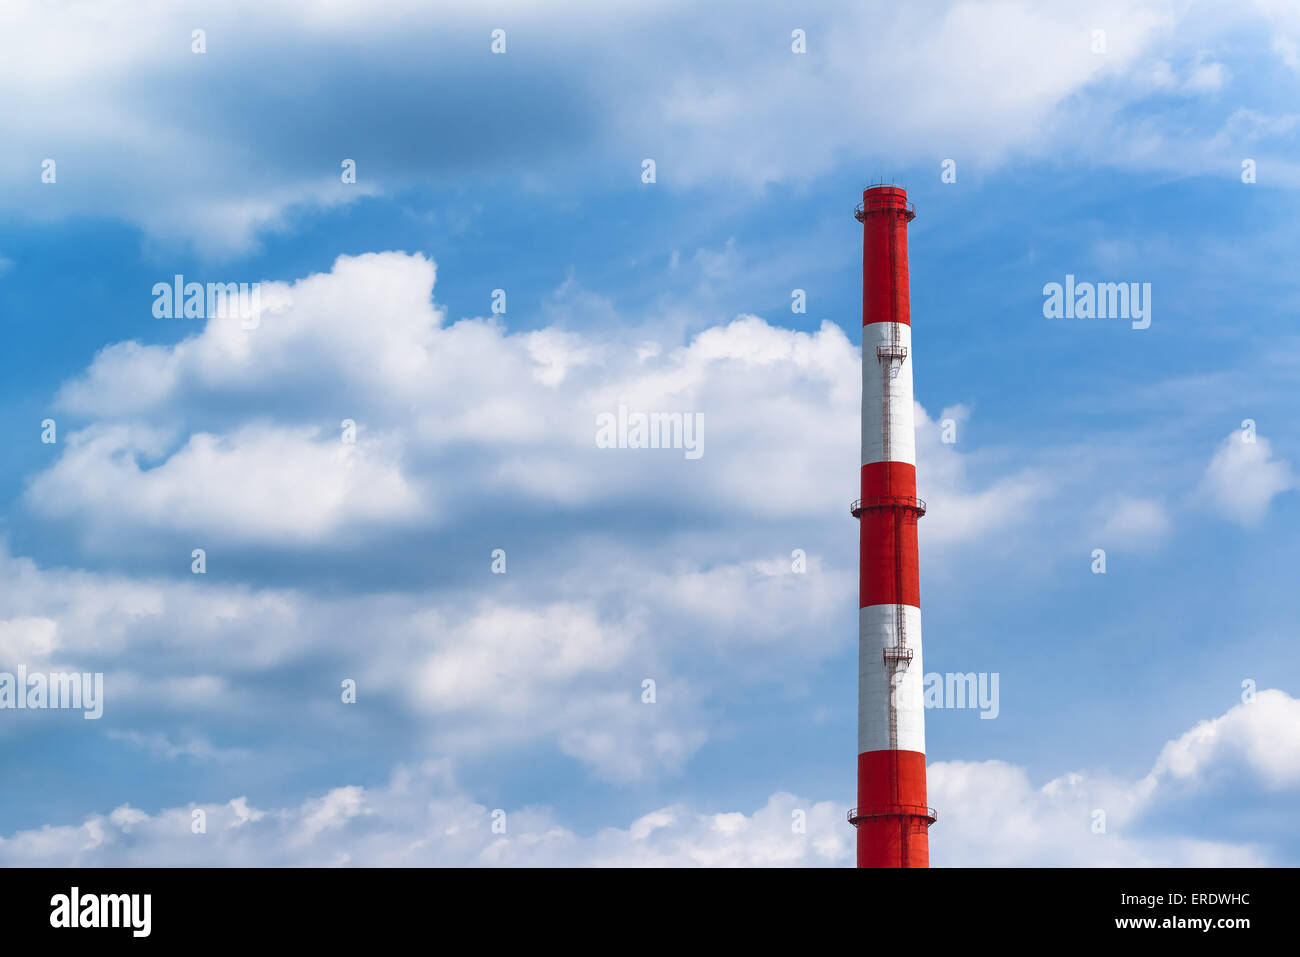 Red and White Power Plant Industrial Chimney Pipe against Blue Cloudy Sky Stock Photo